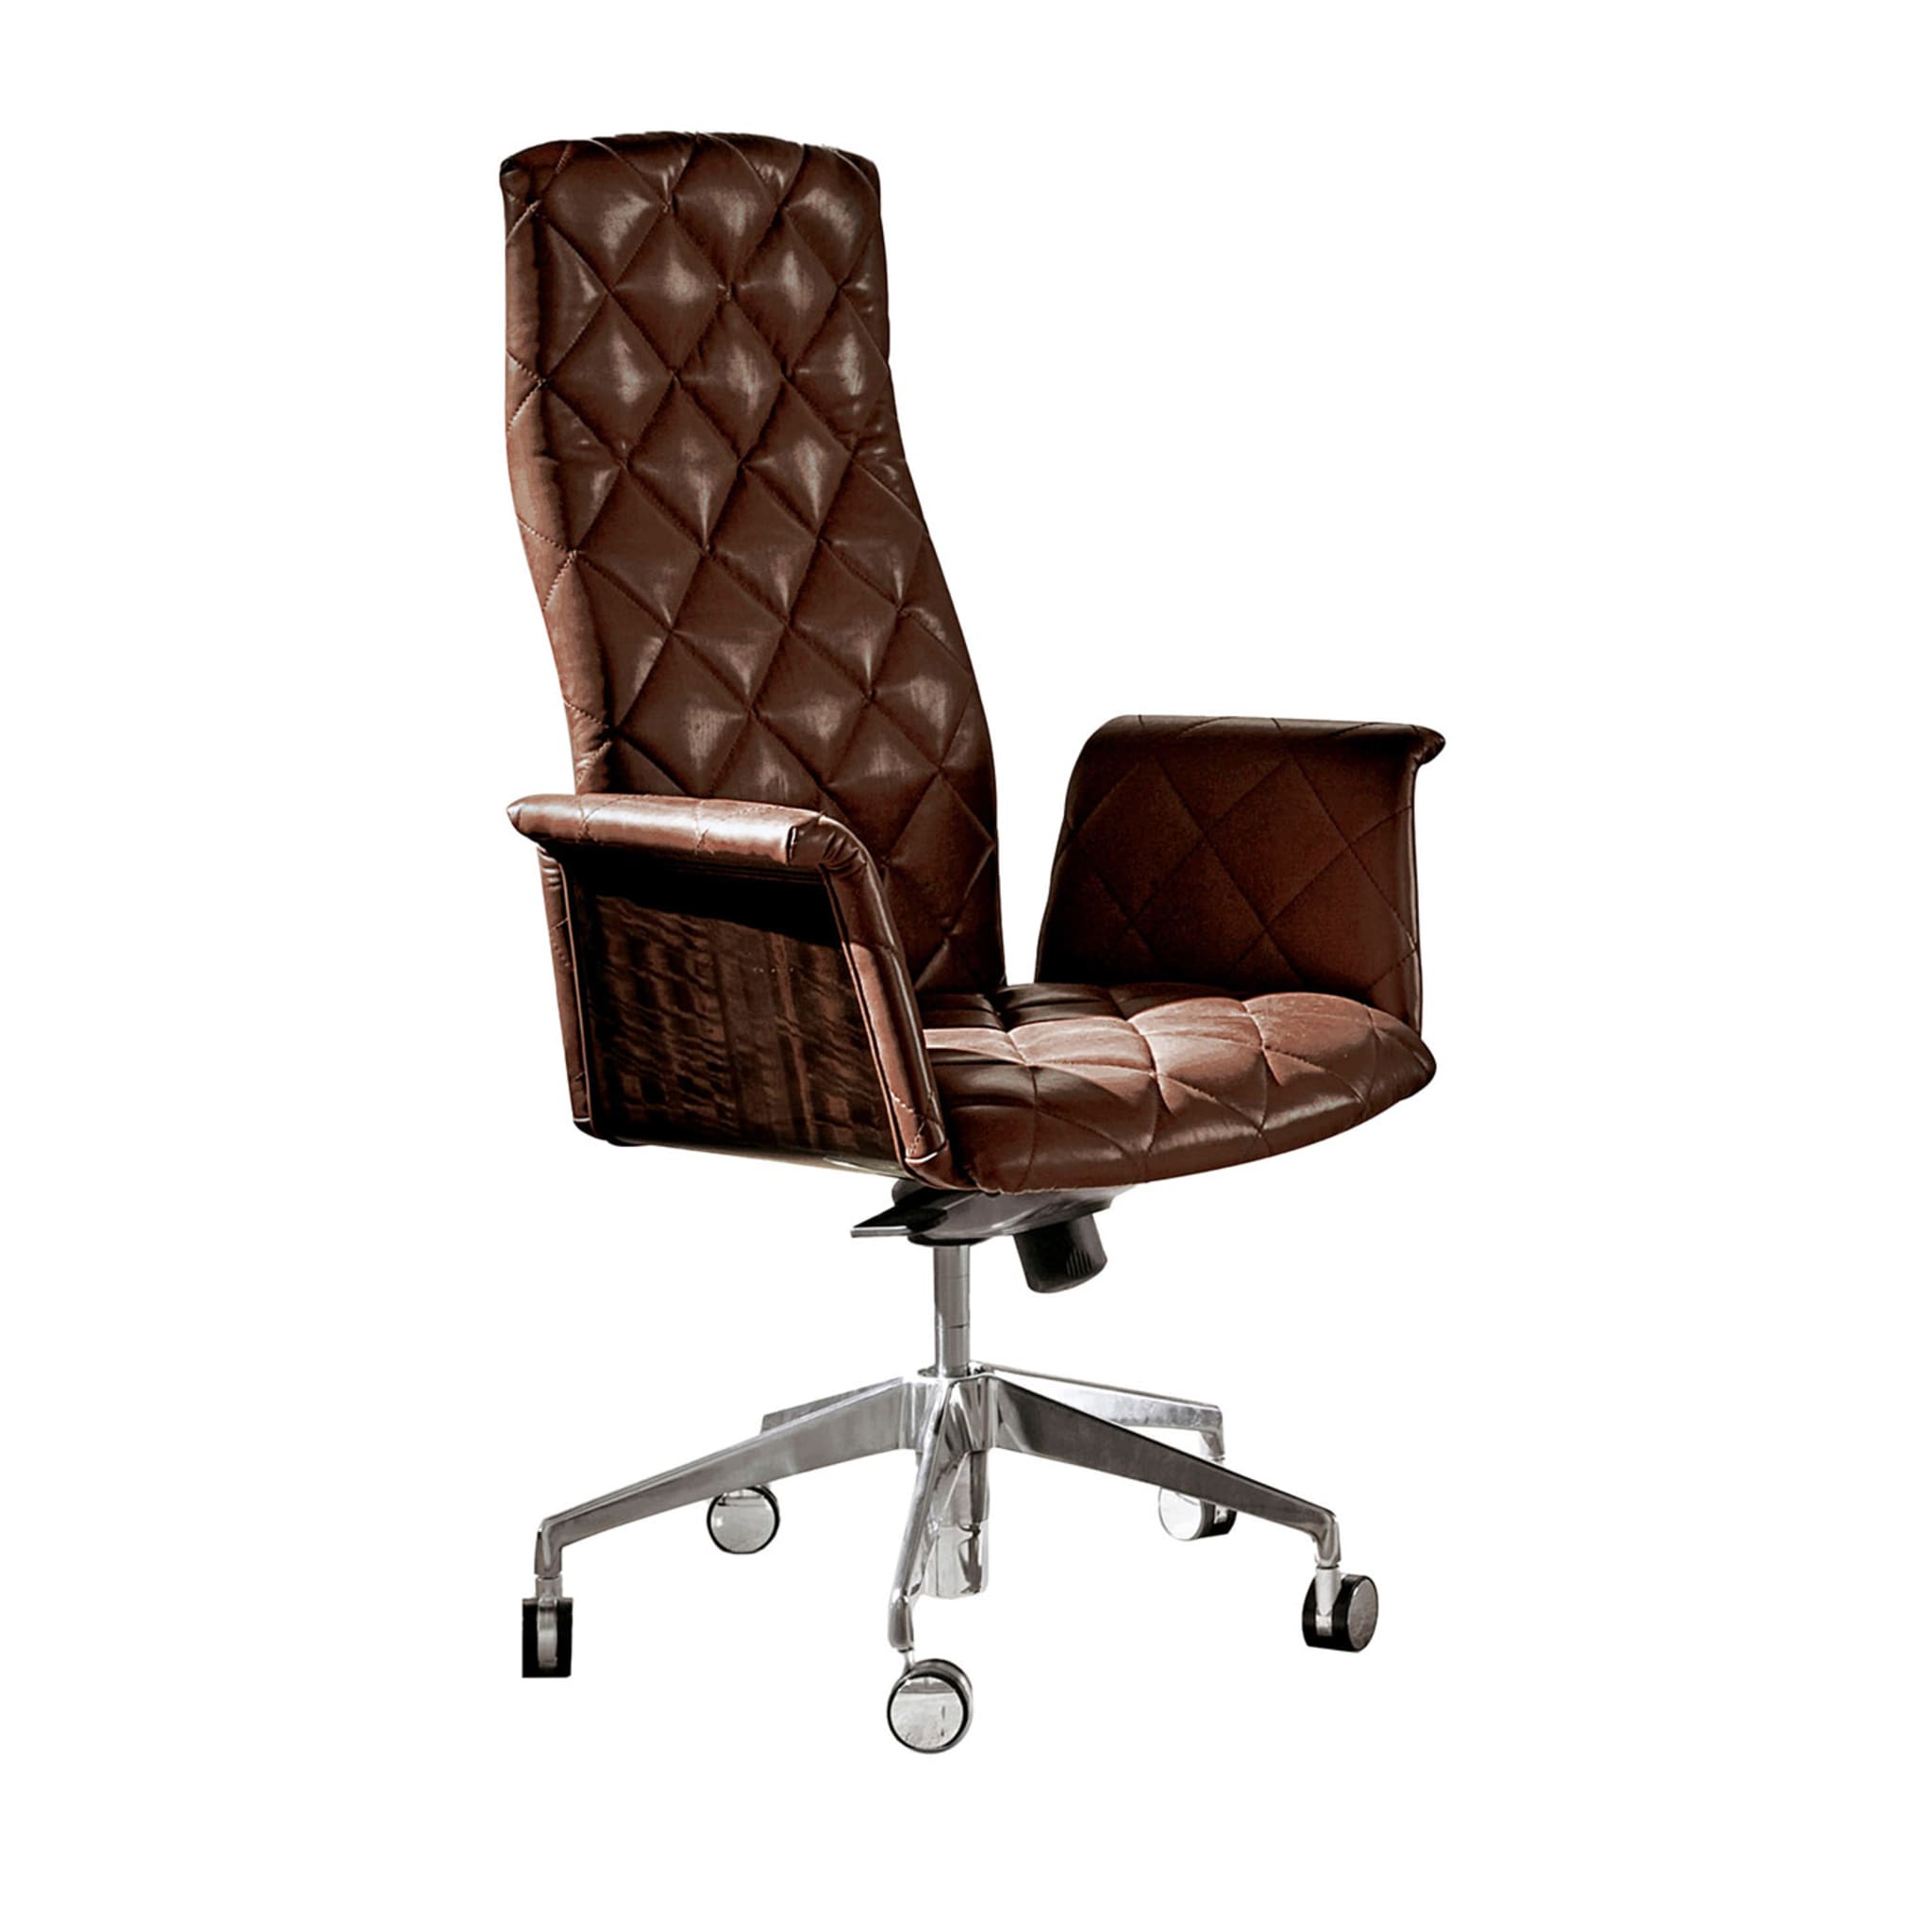 Vogue Quilted Brown Leather Swivel Armchair with Castor #2 - Main view